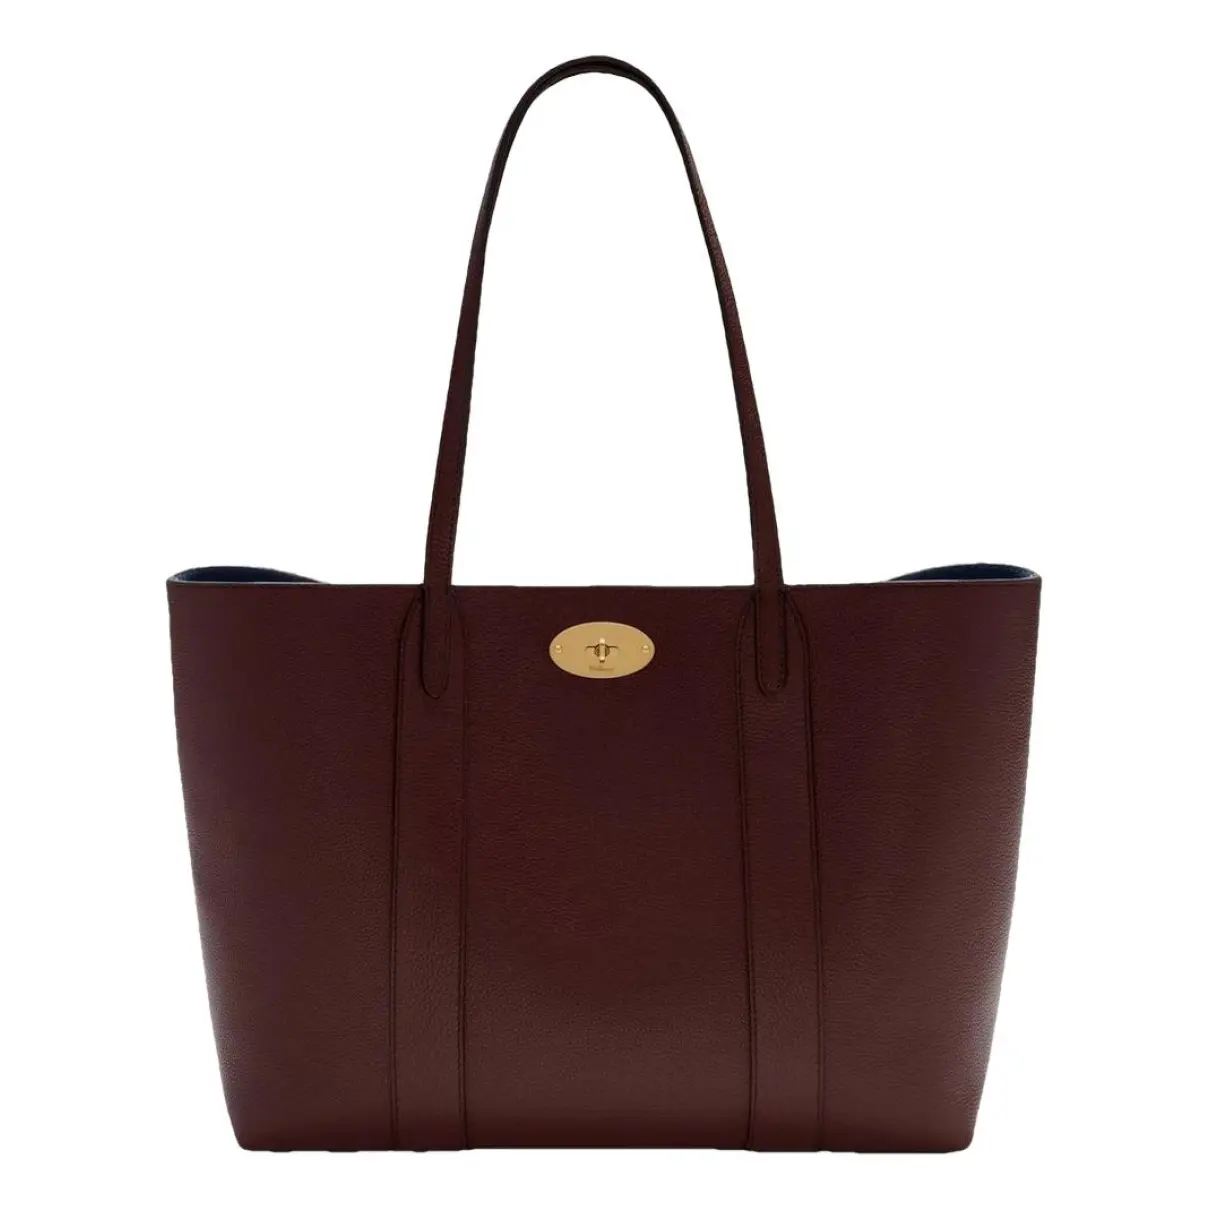 Bayswater tote leather tote